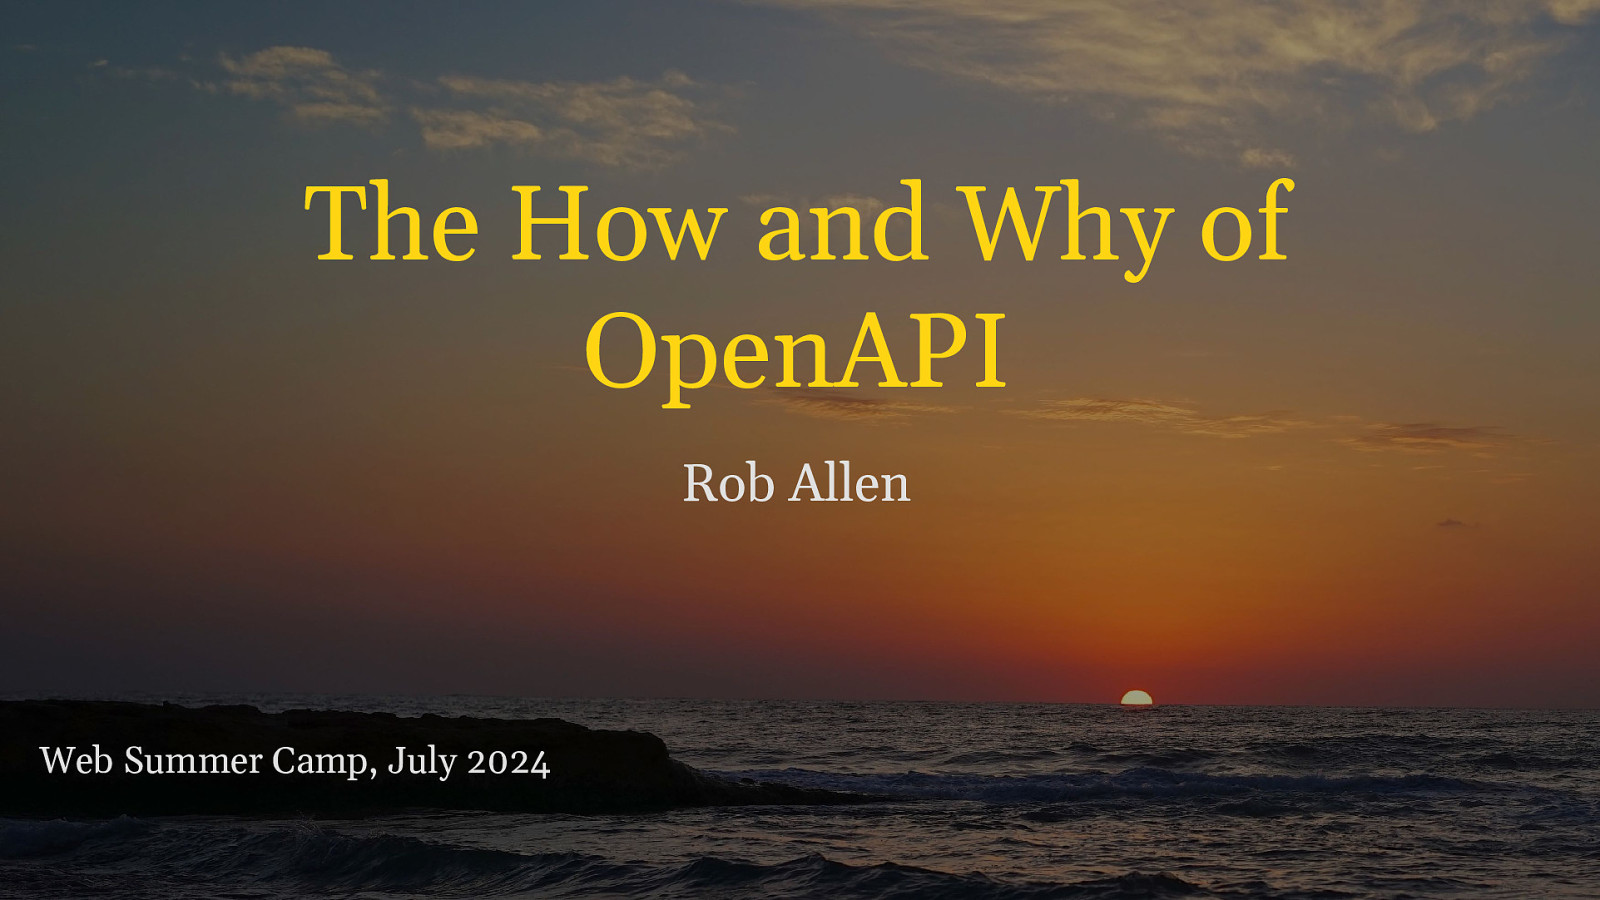 The How and Why of OpenAPI by Rob Allen